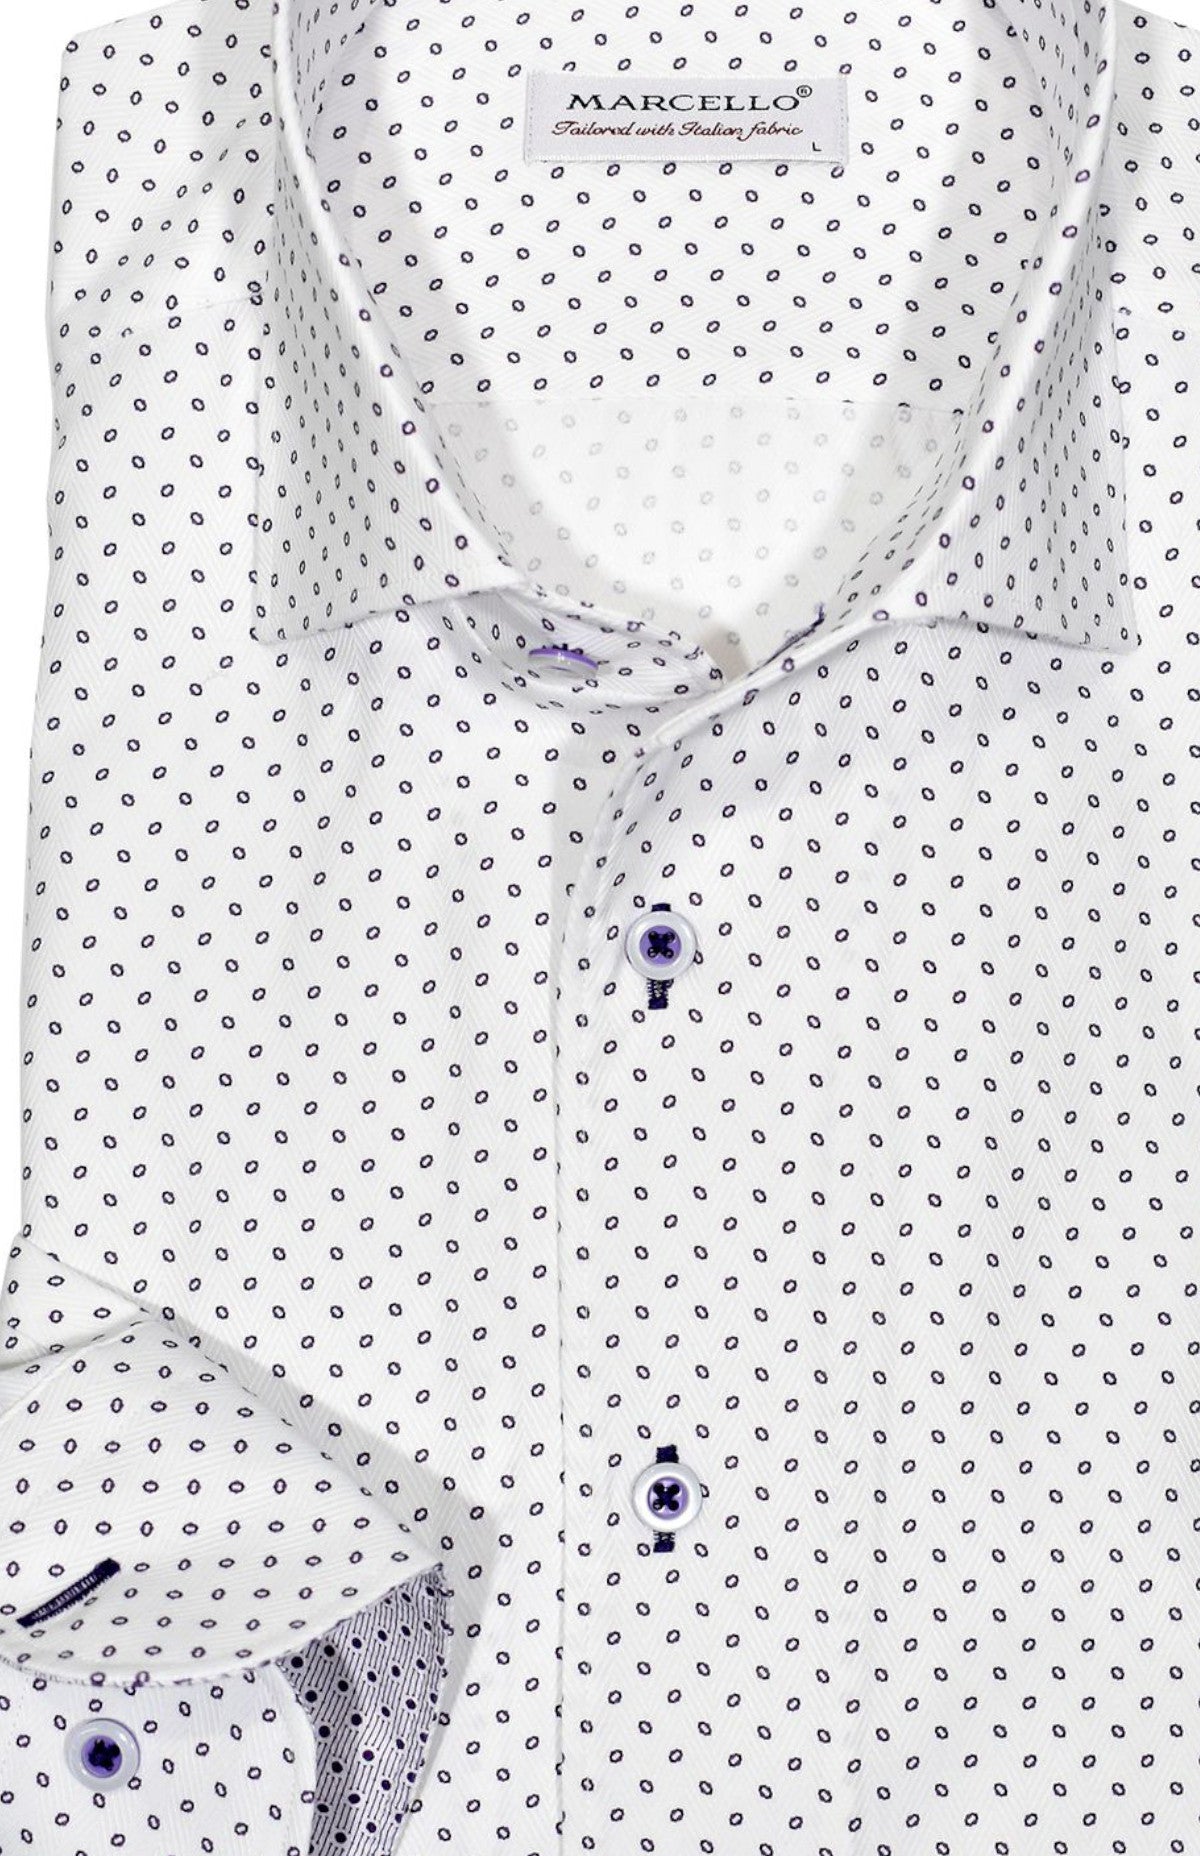 Exclusive Marcello 1 Piece Roll Collar Shirt.  The one piece roll collar stands perfectly and looks fantastic alone or under a sport coat.  The classic lilac open paisley pattern coupled with a rich tonal herringbone fabric creates a sophisticated look to set your apart from the rest.  Hand selected buttons, two button cuff placket for the best look when rolling up the cuffs and enhanced stitch detailing.  Classic shaped fit.